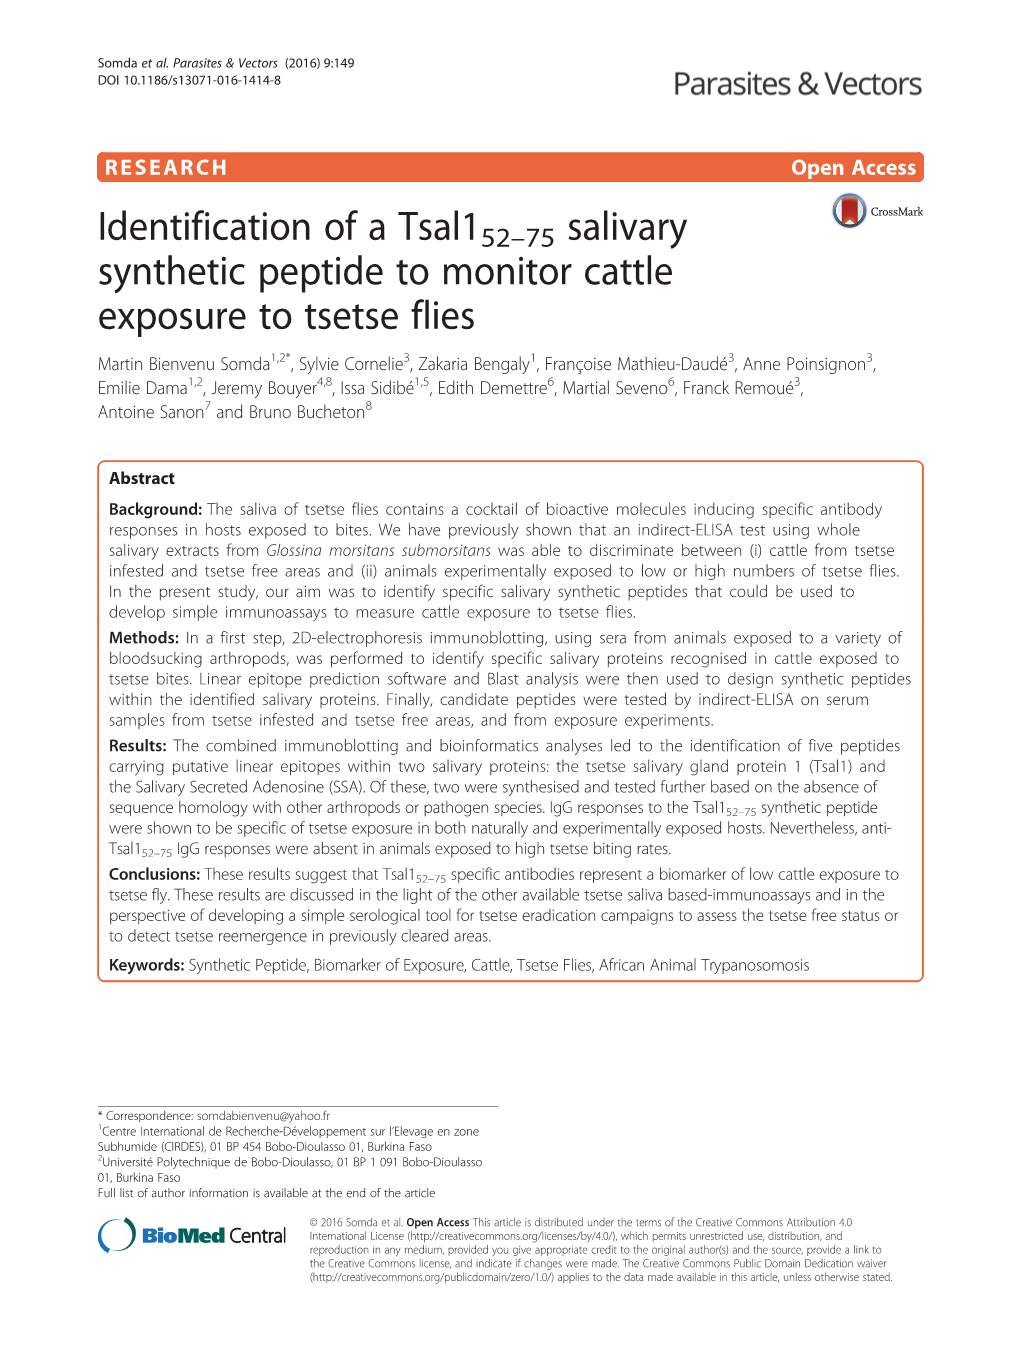 Identification of a Tsal152–75 Salivary Synthetic Peptide to Monitor Cattle